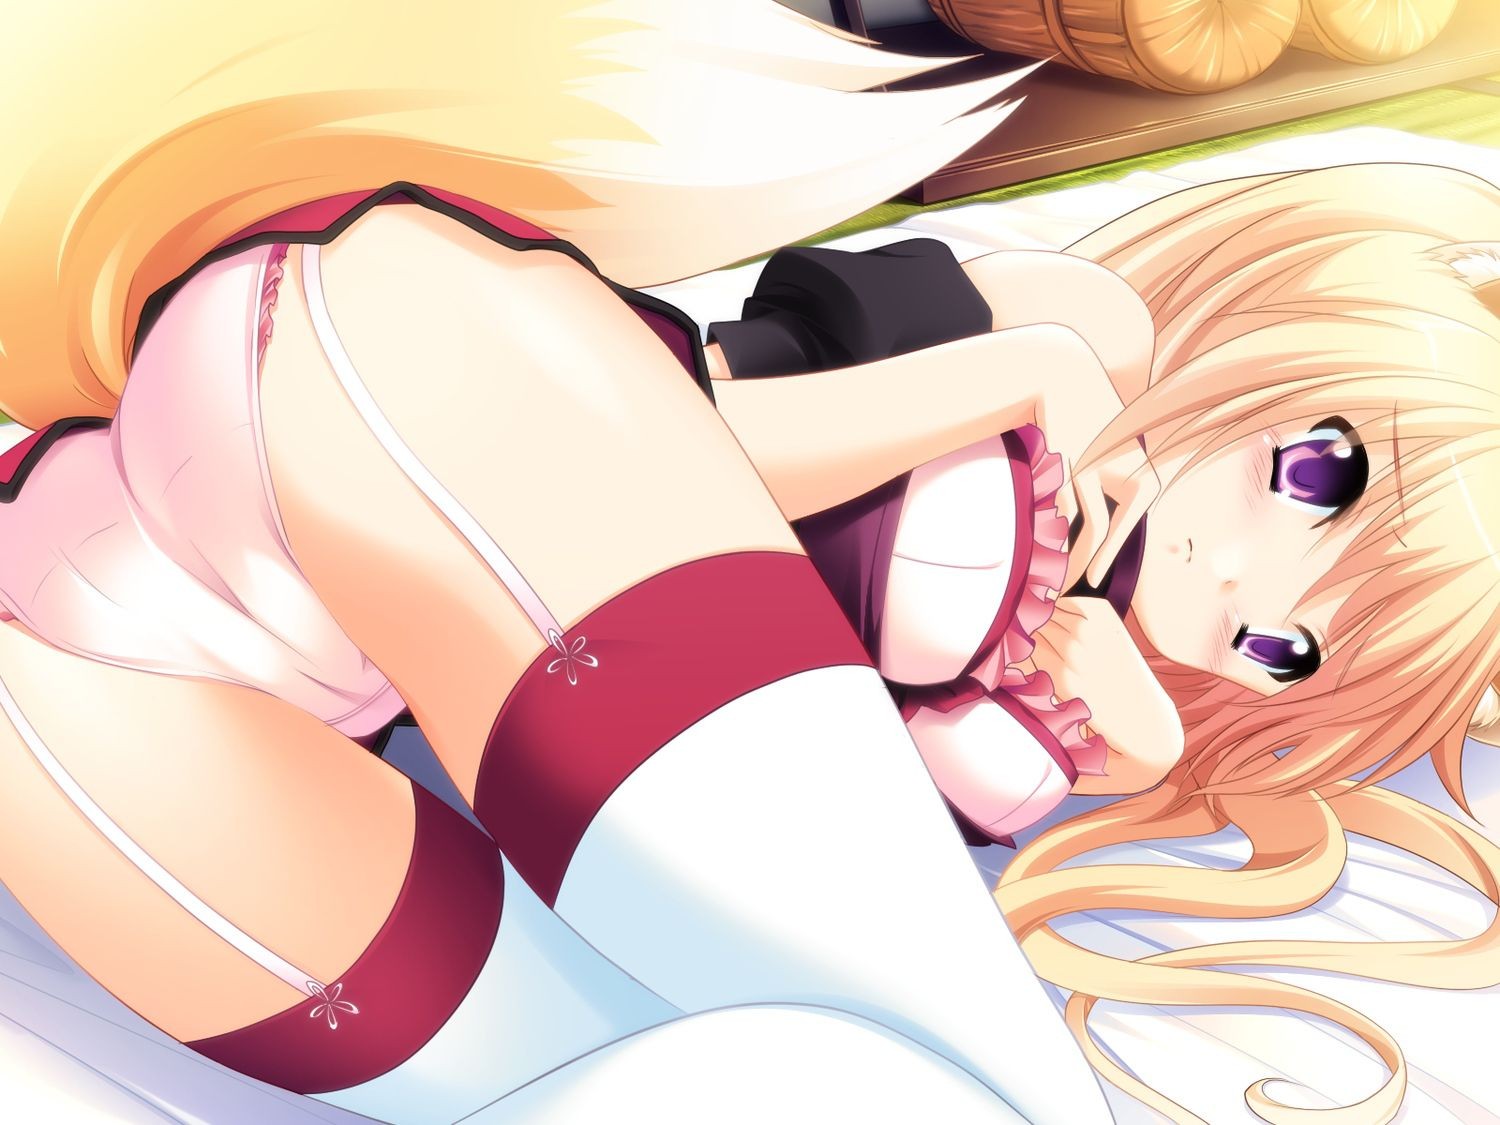 Soapy Love God - Love CAMI - [18 PC Anime Games Wallpapers And Pictures Part 2 Exposed